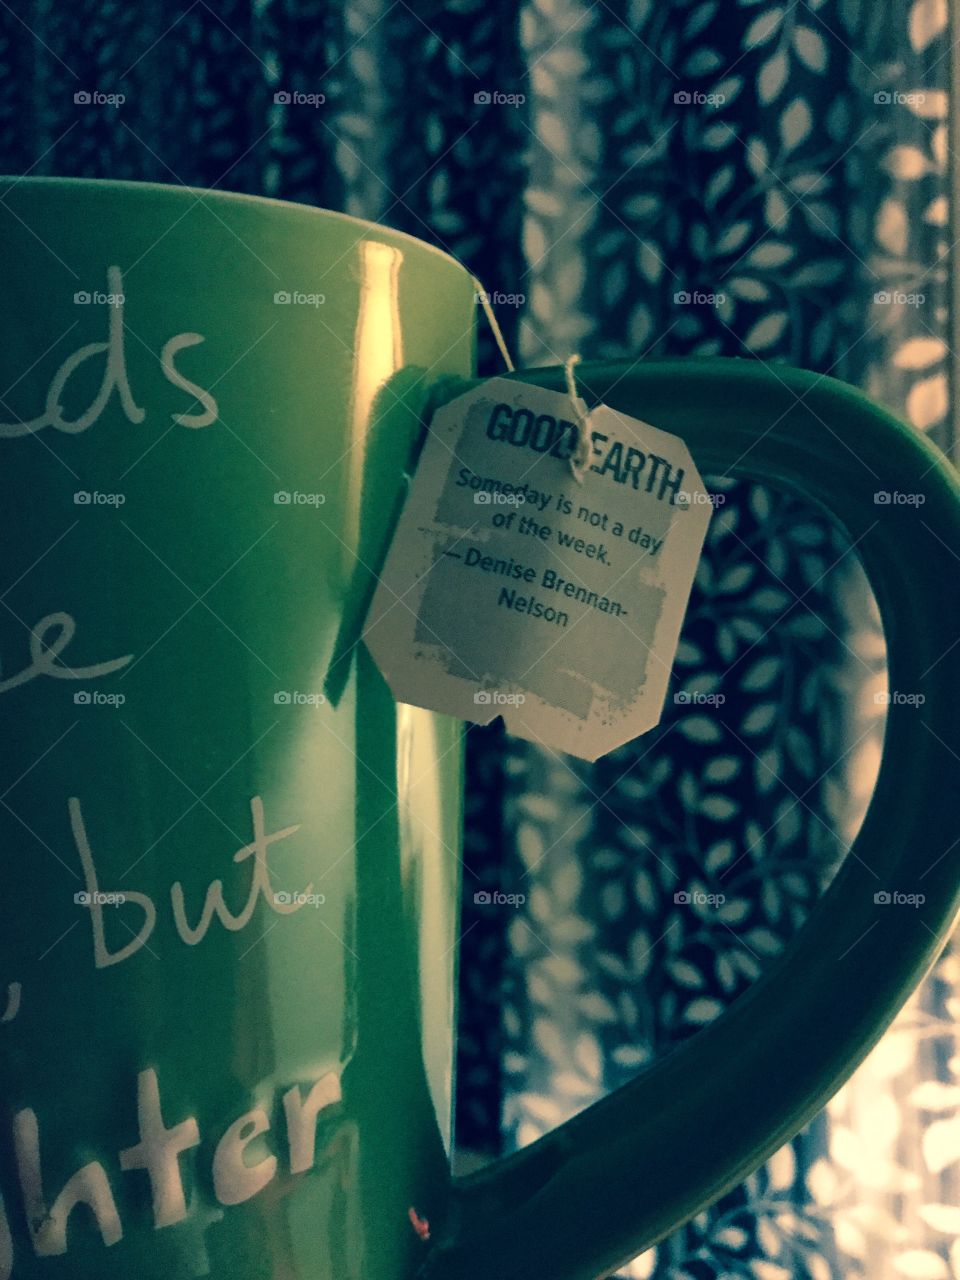 Tea with the message. #Goodearth